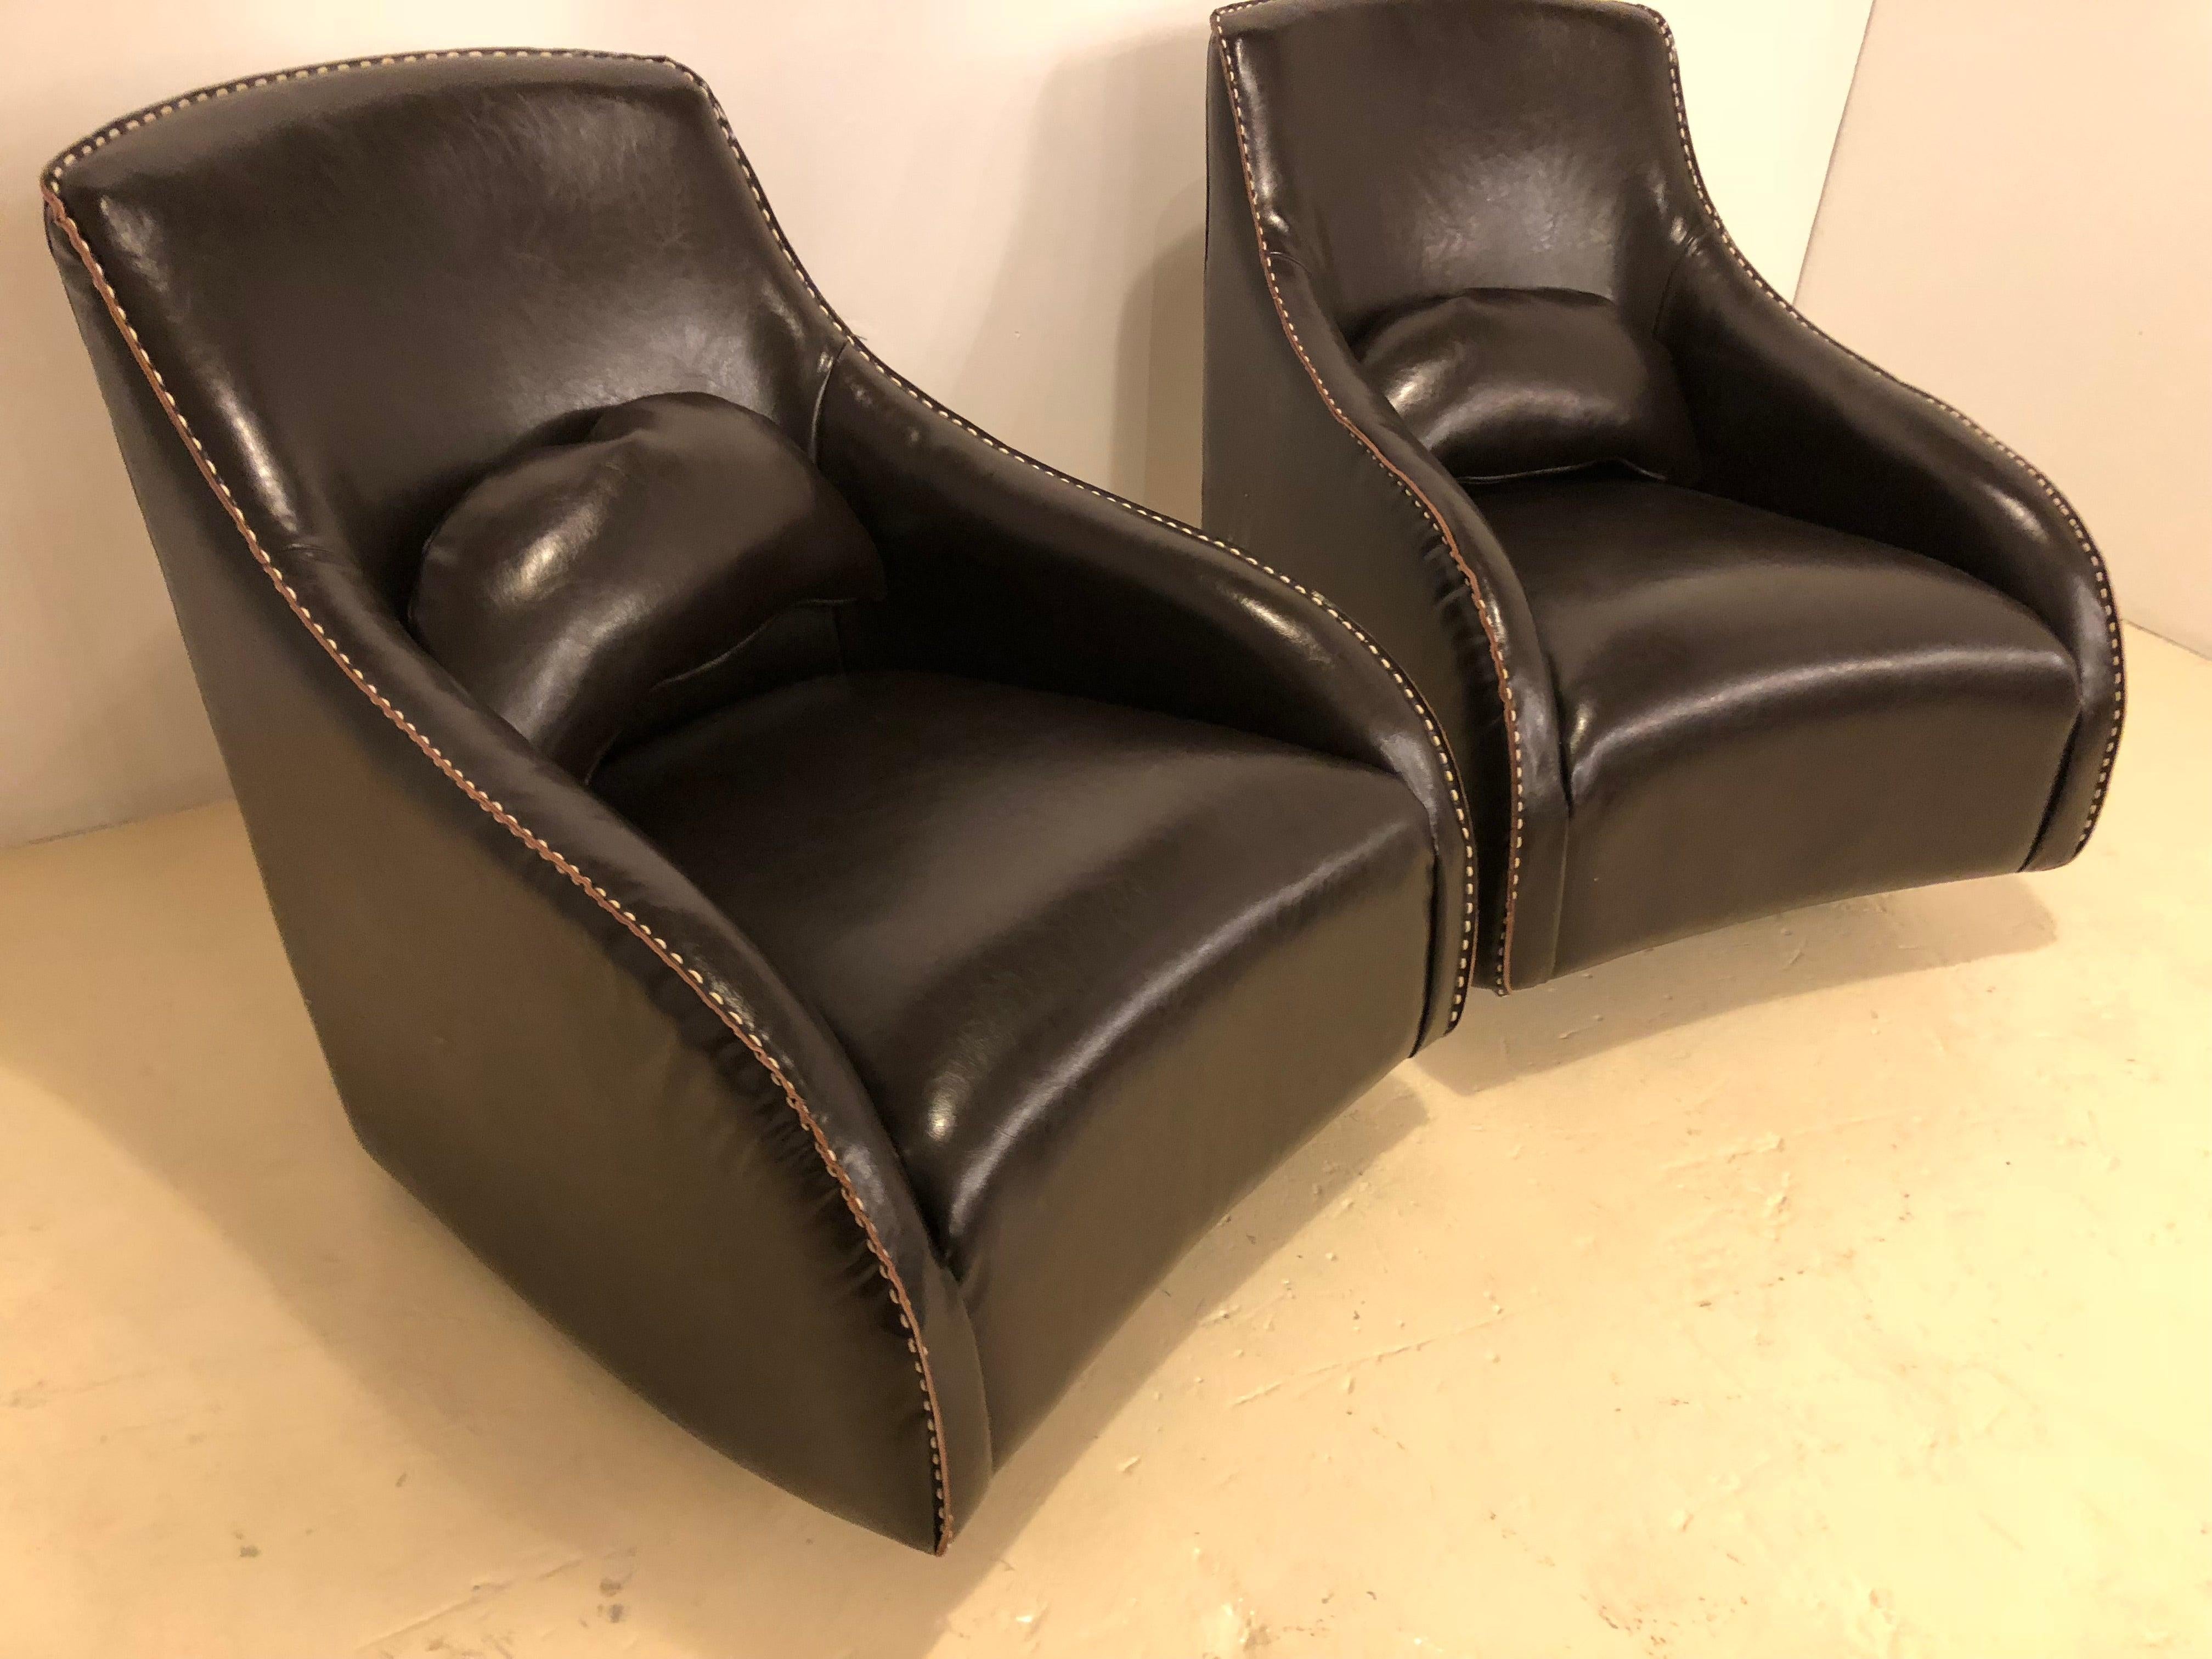 A timeless pair of fine leather rocking club chairs in the Mid-Century Modern style. Each chair is handstitched and features a dark brown color that will fit in any living space. The chairs are as much as very comfortable as stylish.